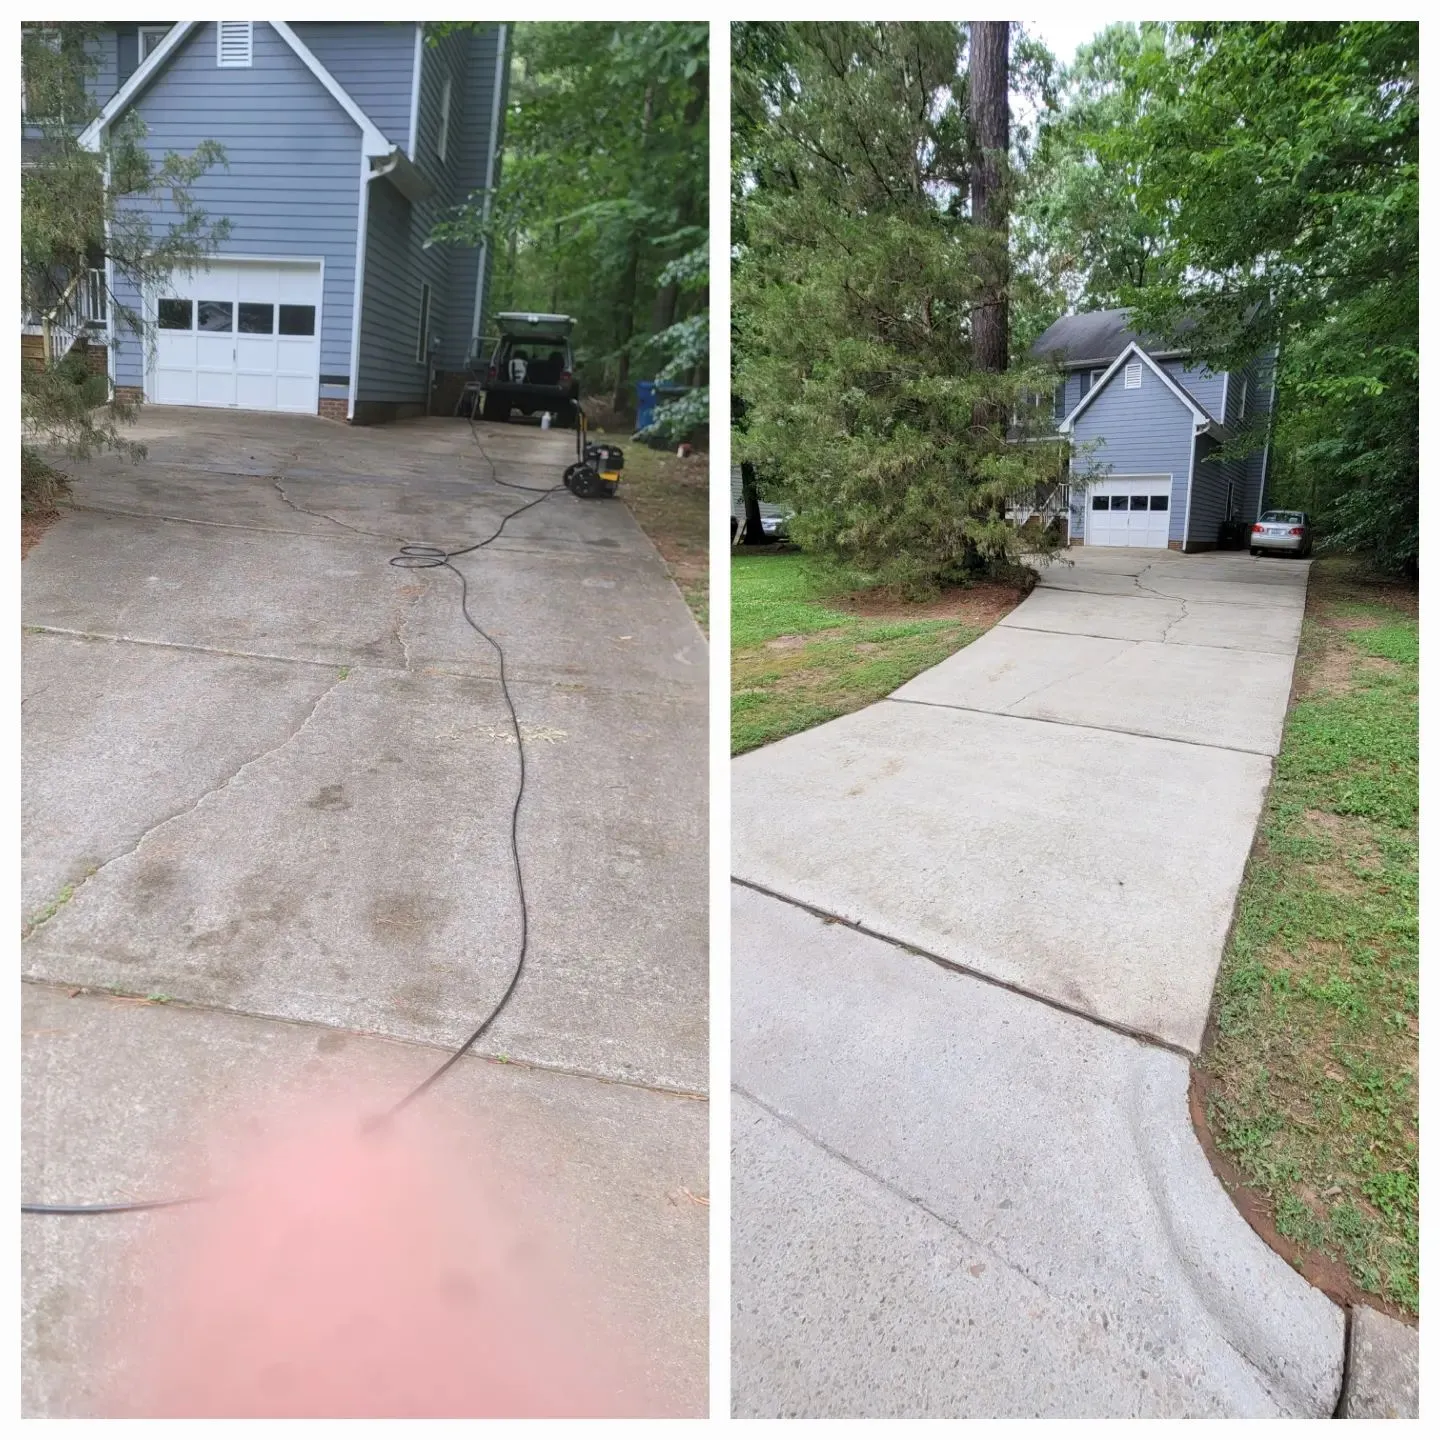 Concrete Cleaning for Critts Pressure Washing in Bethesda, NC